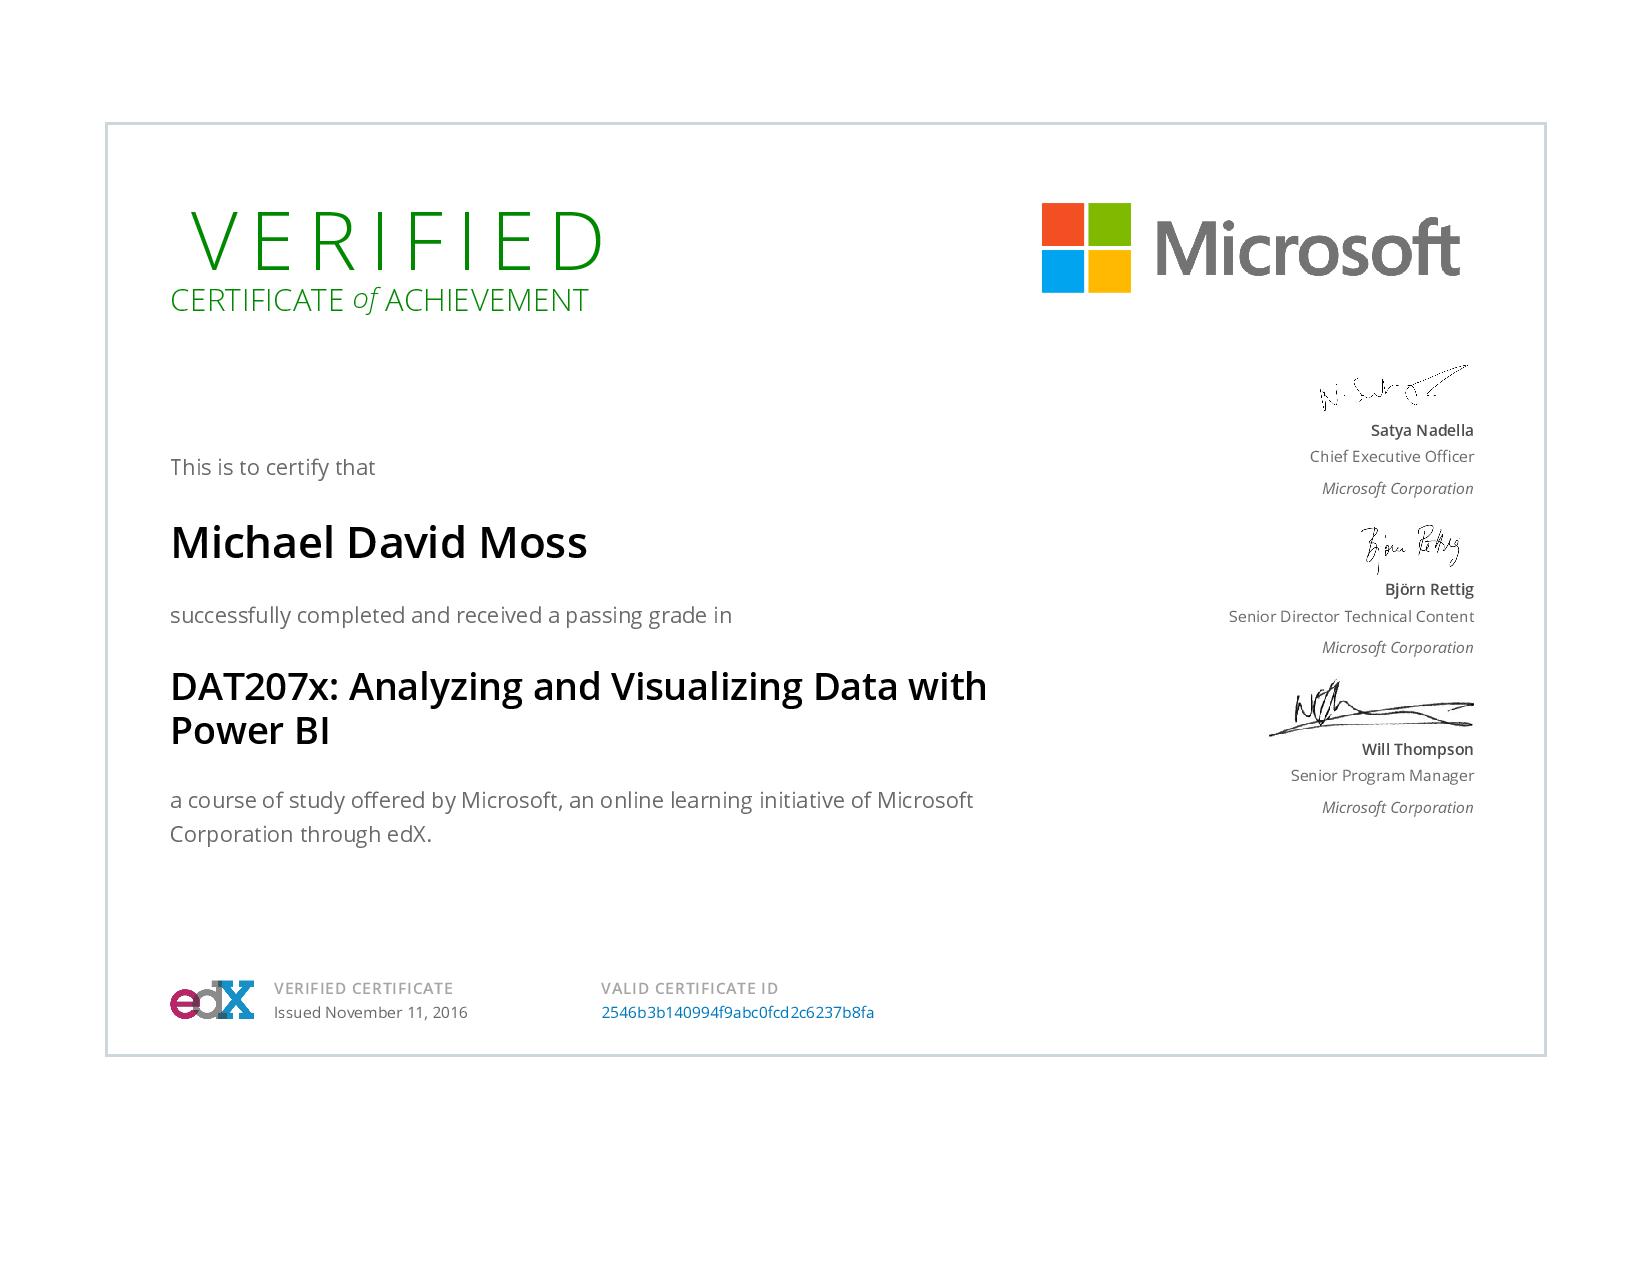 Analyzing and Visualizing Data with Power BI Certificate